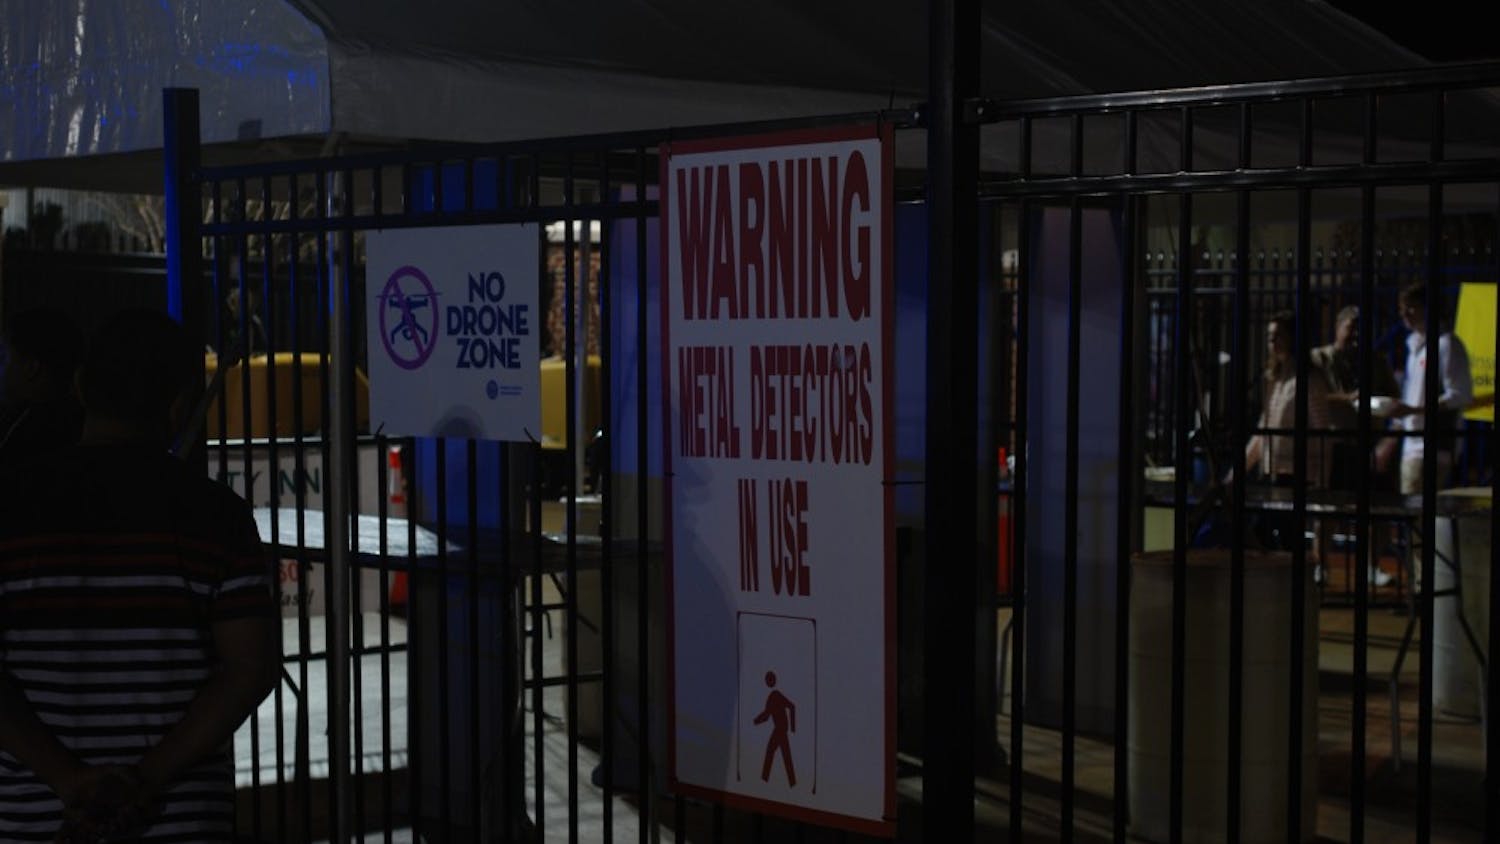 The SC State Fair put up metal detectors at its entrances since a shooting in 2004, according to The State.